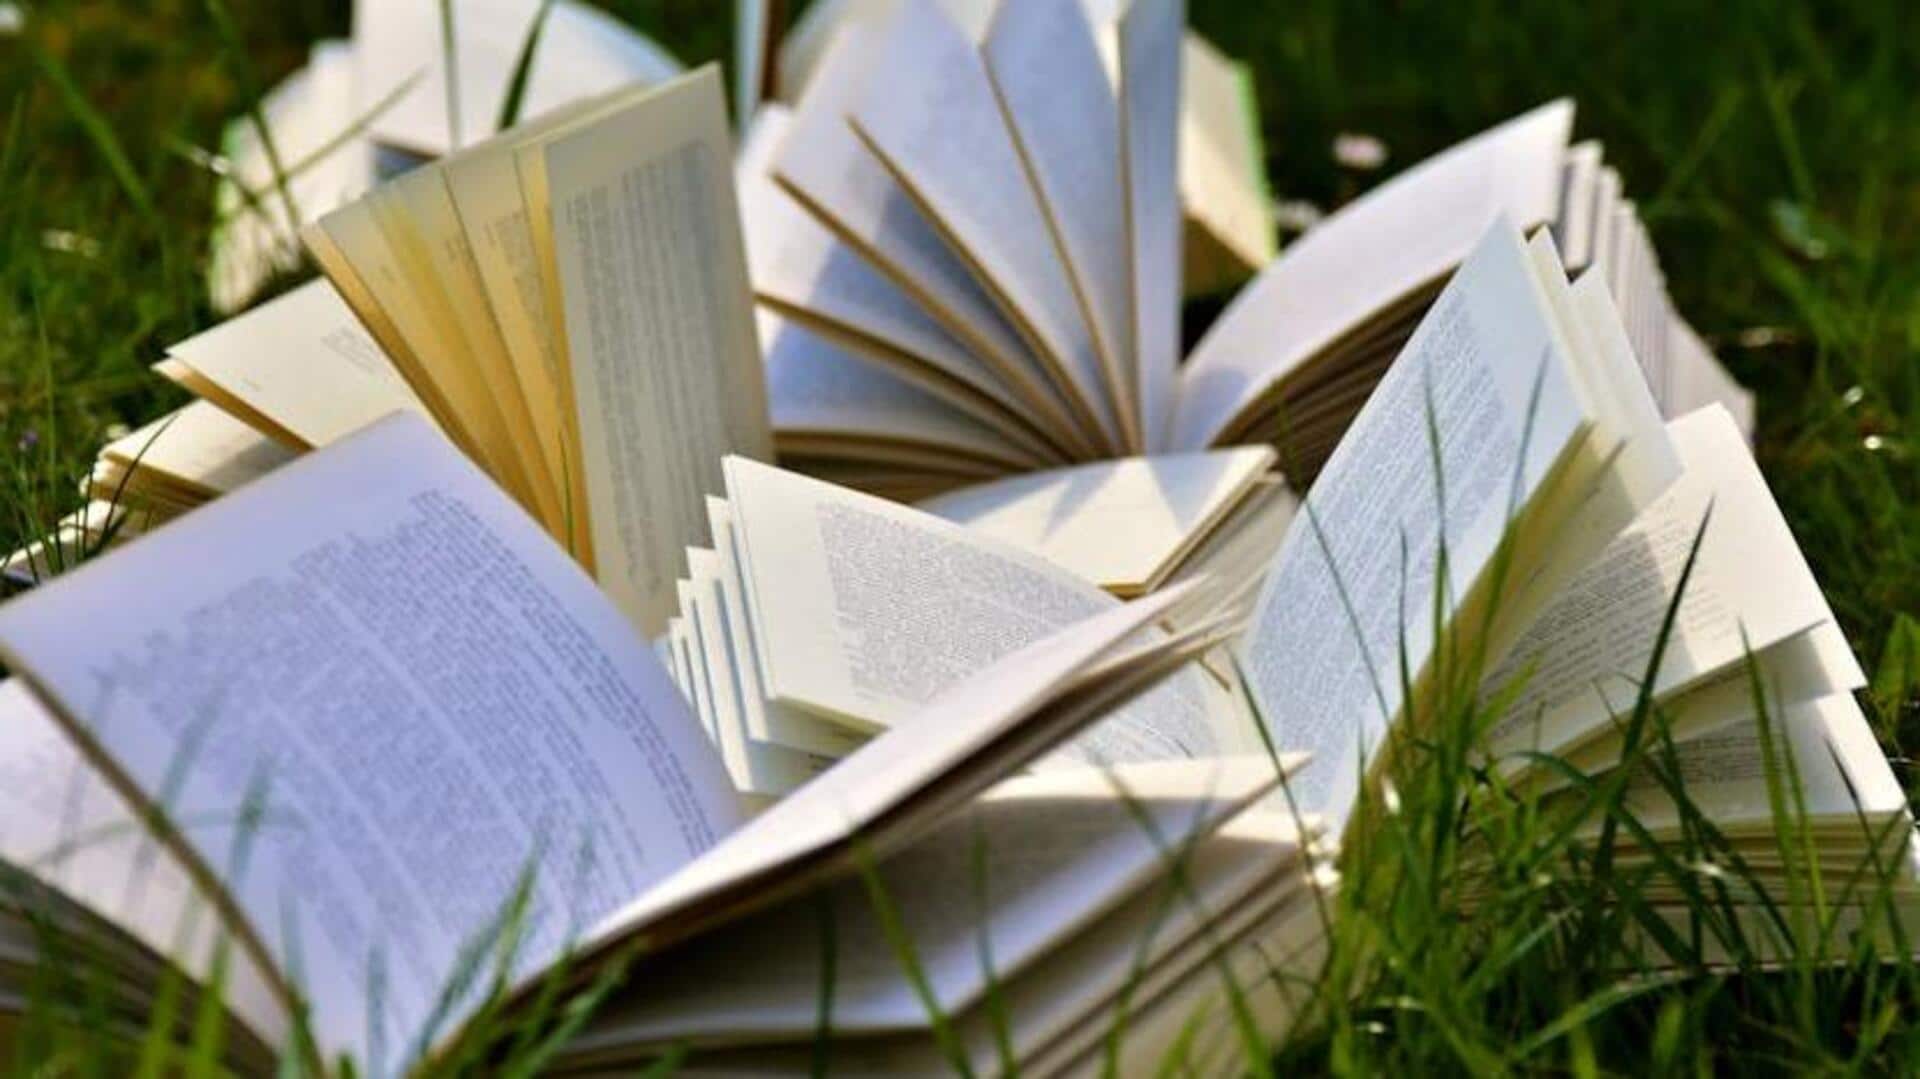 Exploring world literature in your 20s: Top books to read